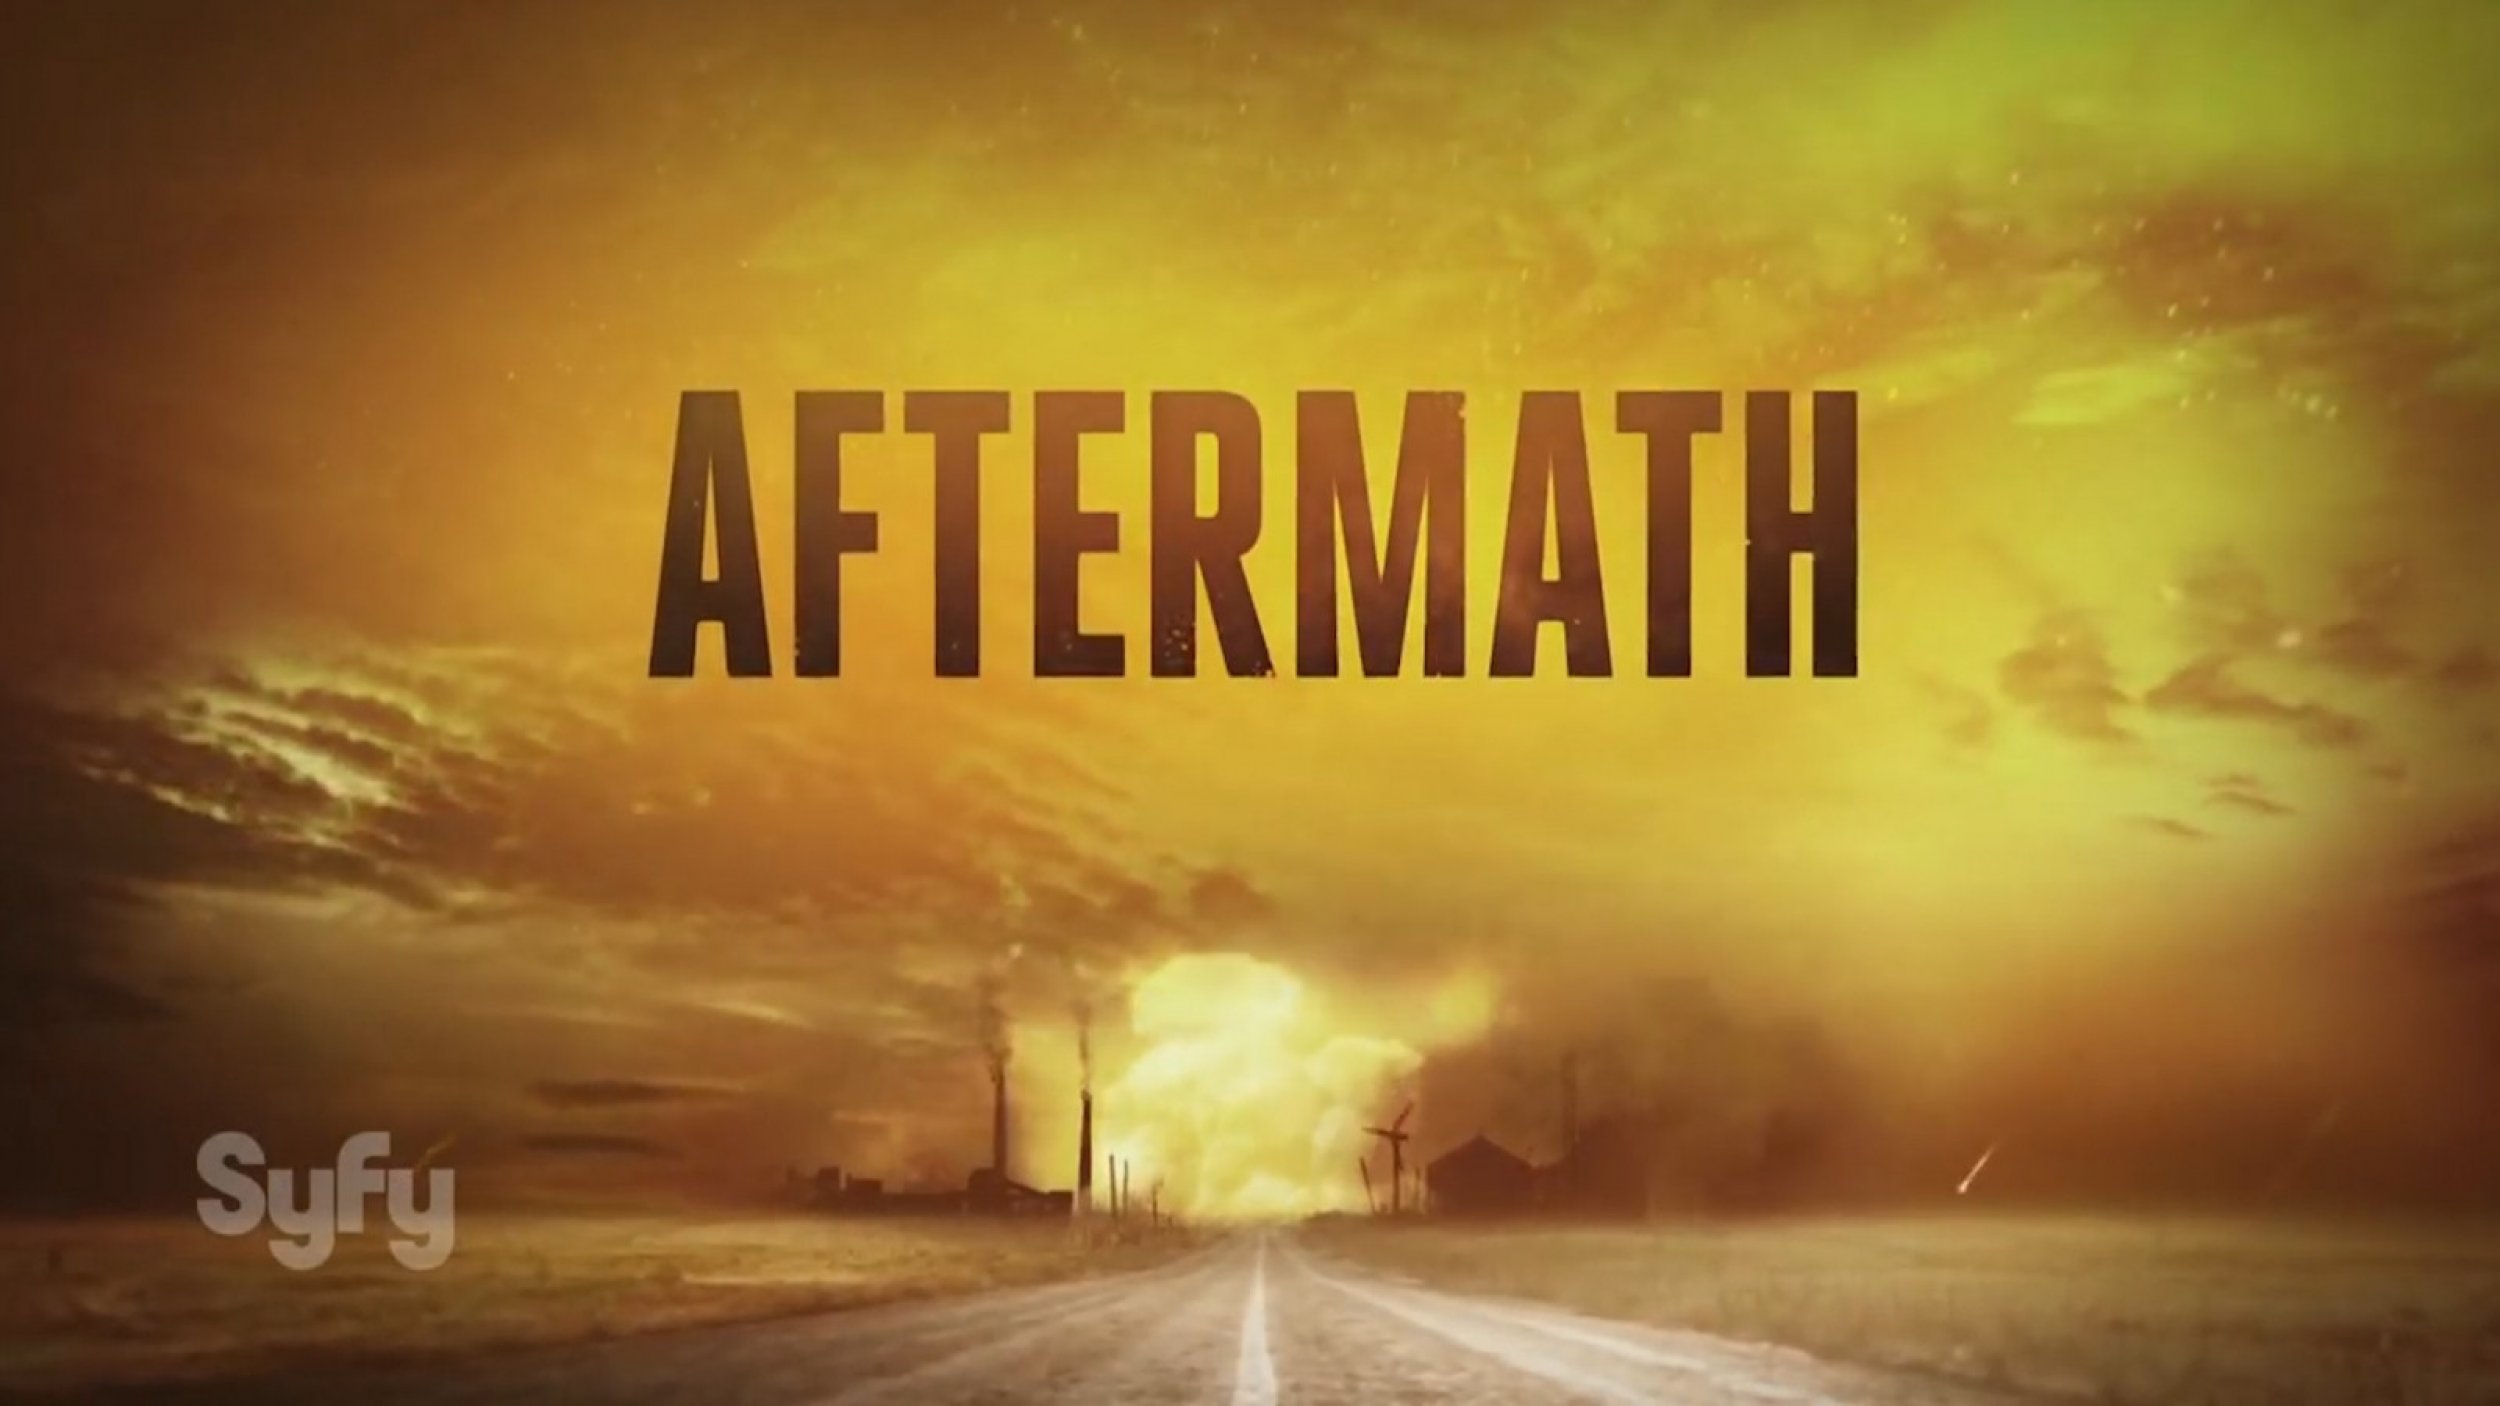 Aftermath  Trailer - Premieres September 27th  Syfy 